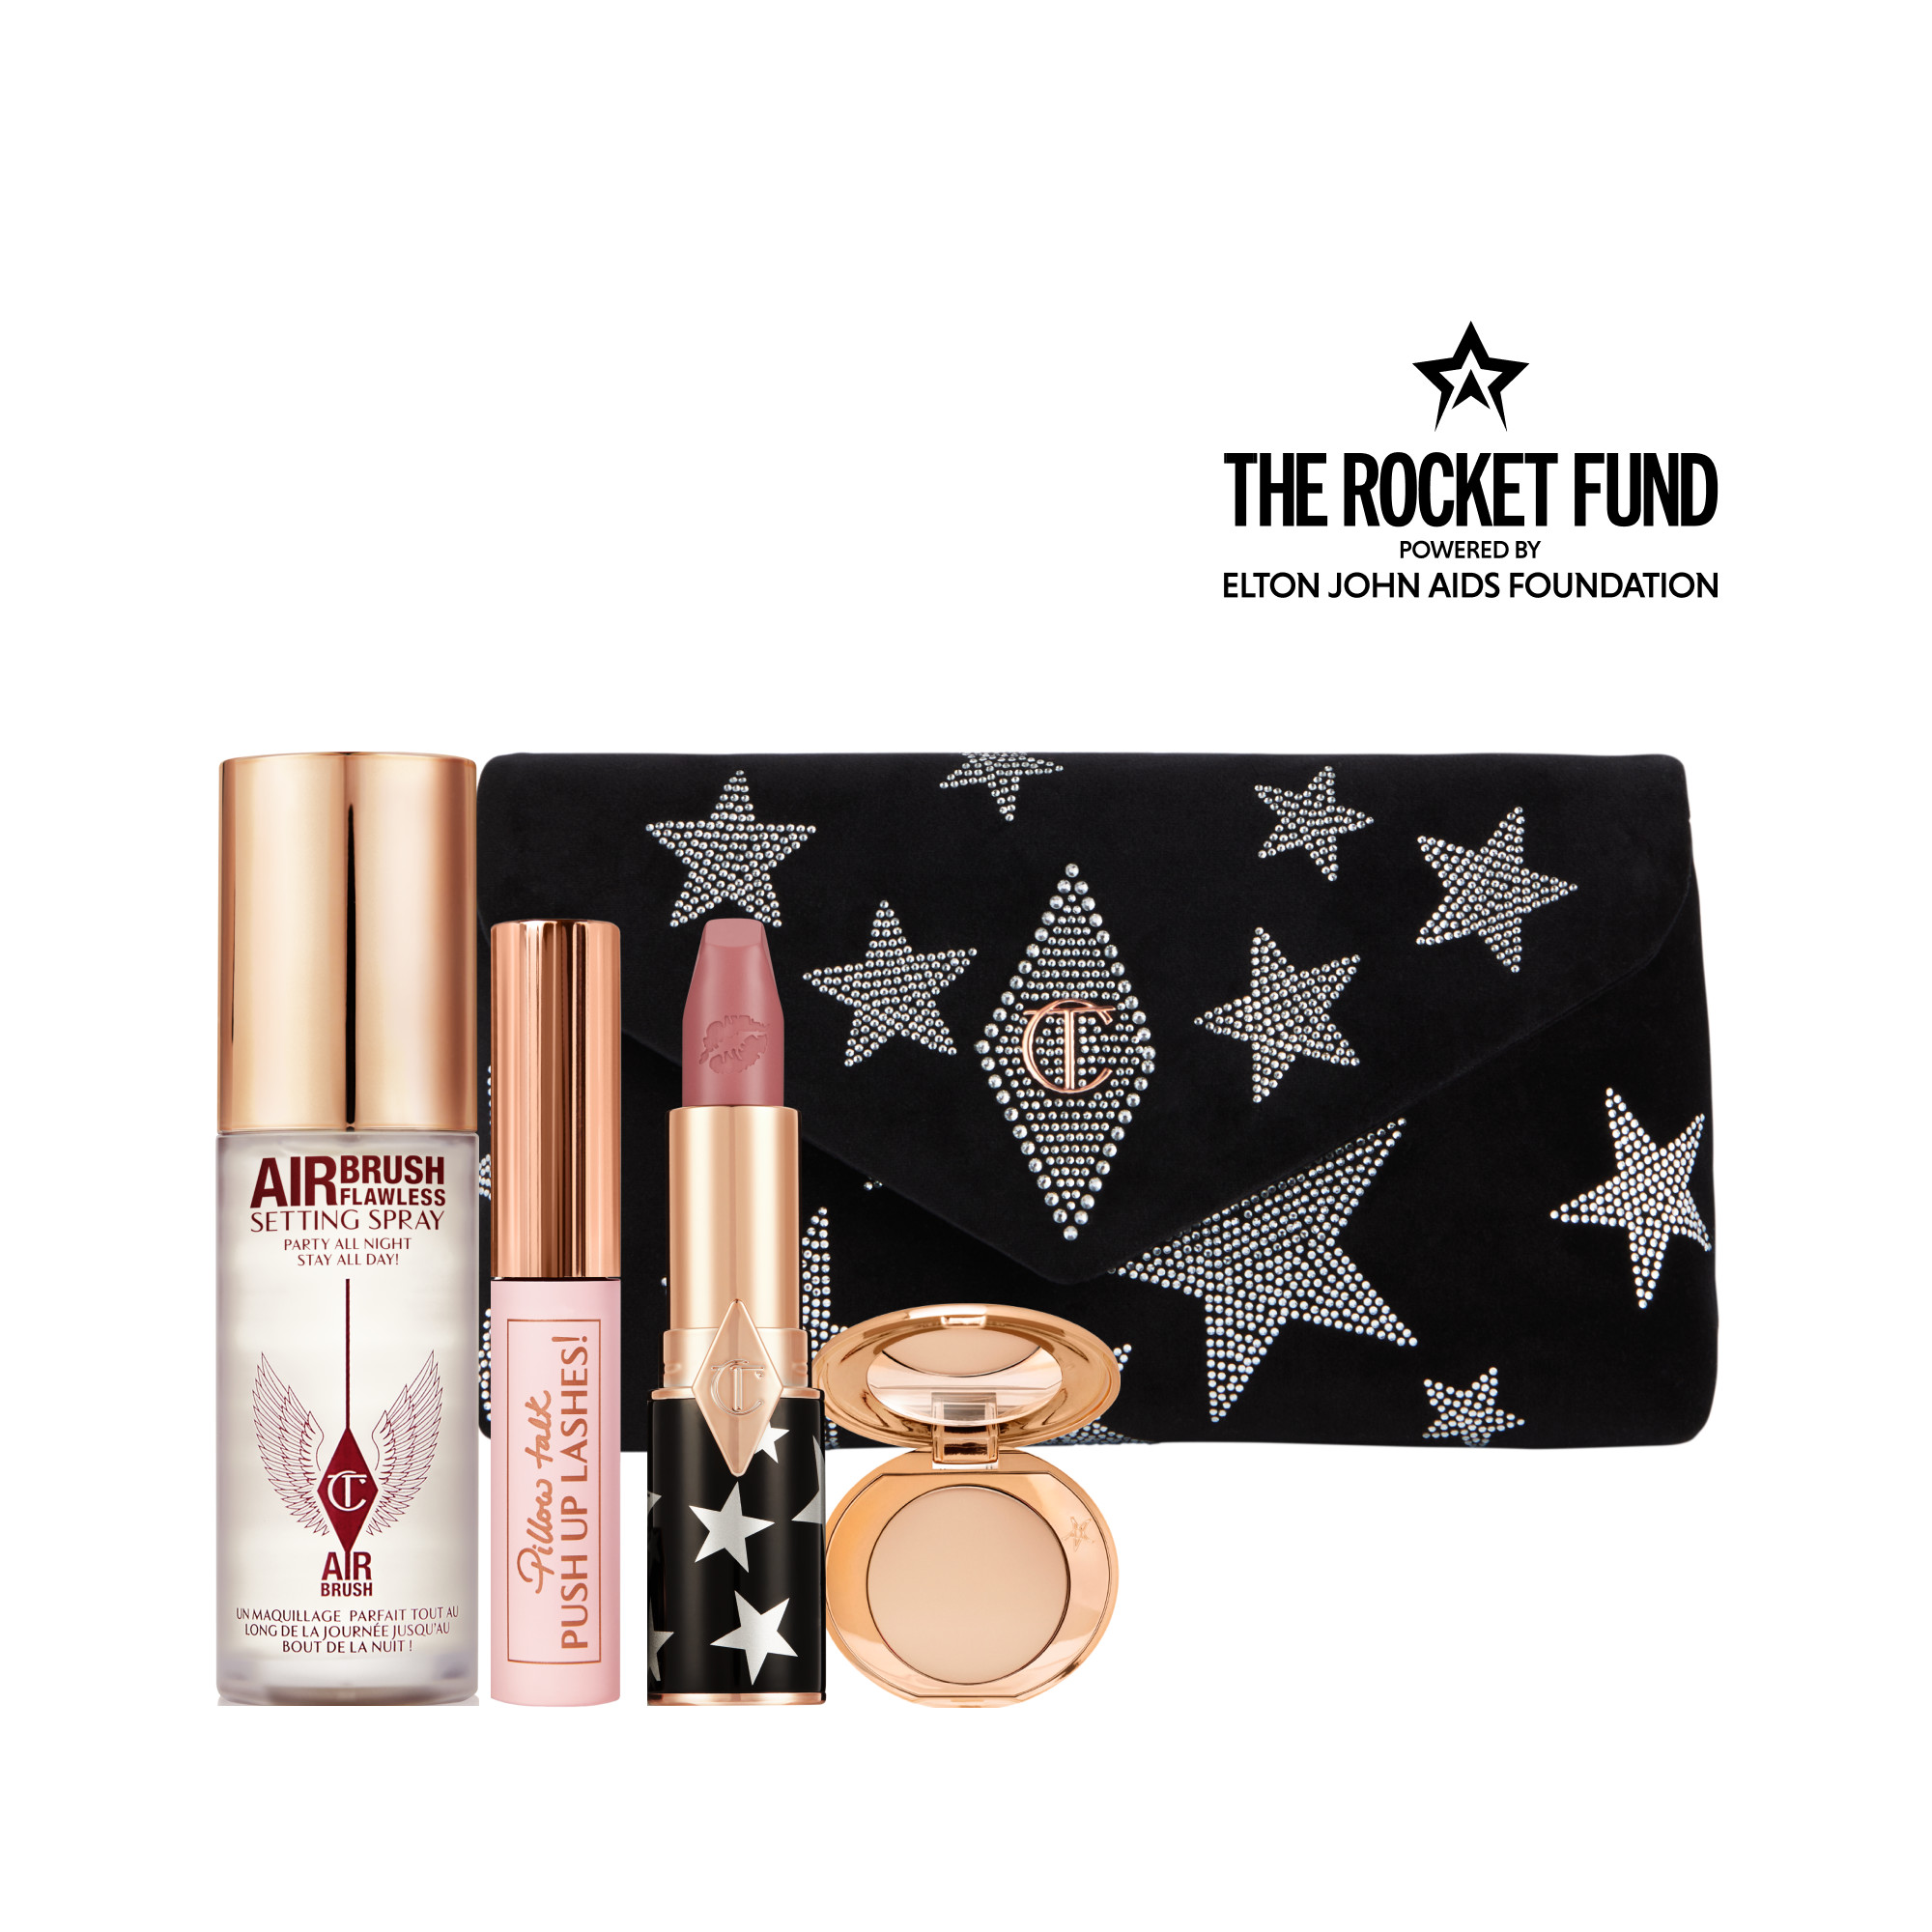 Charlotte Tilbury Showstopping Beauty Icons - Limited Edition Makeup & Bag Kit